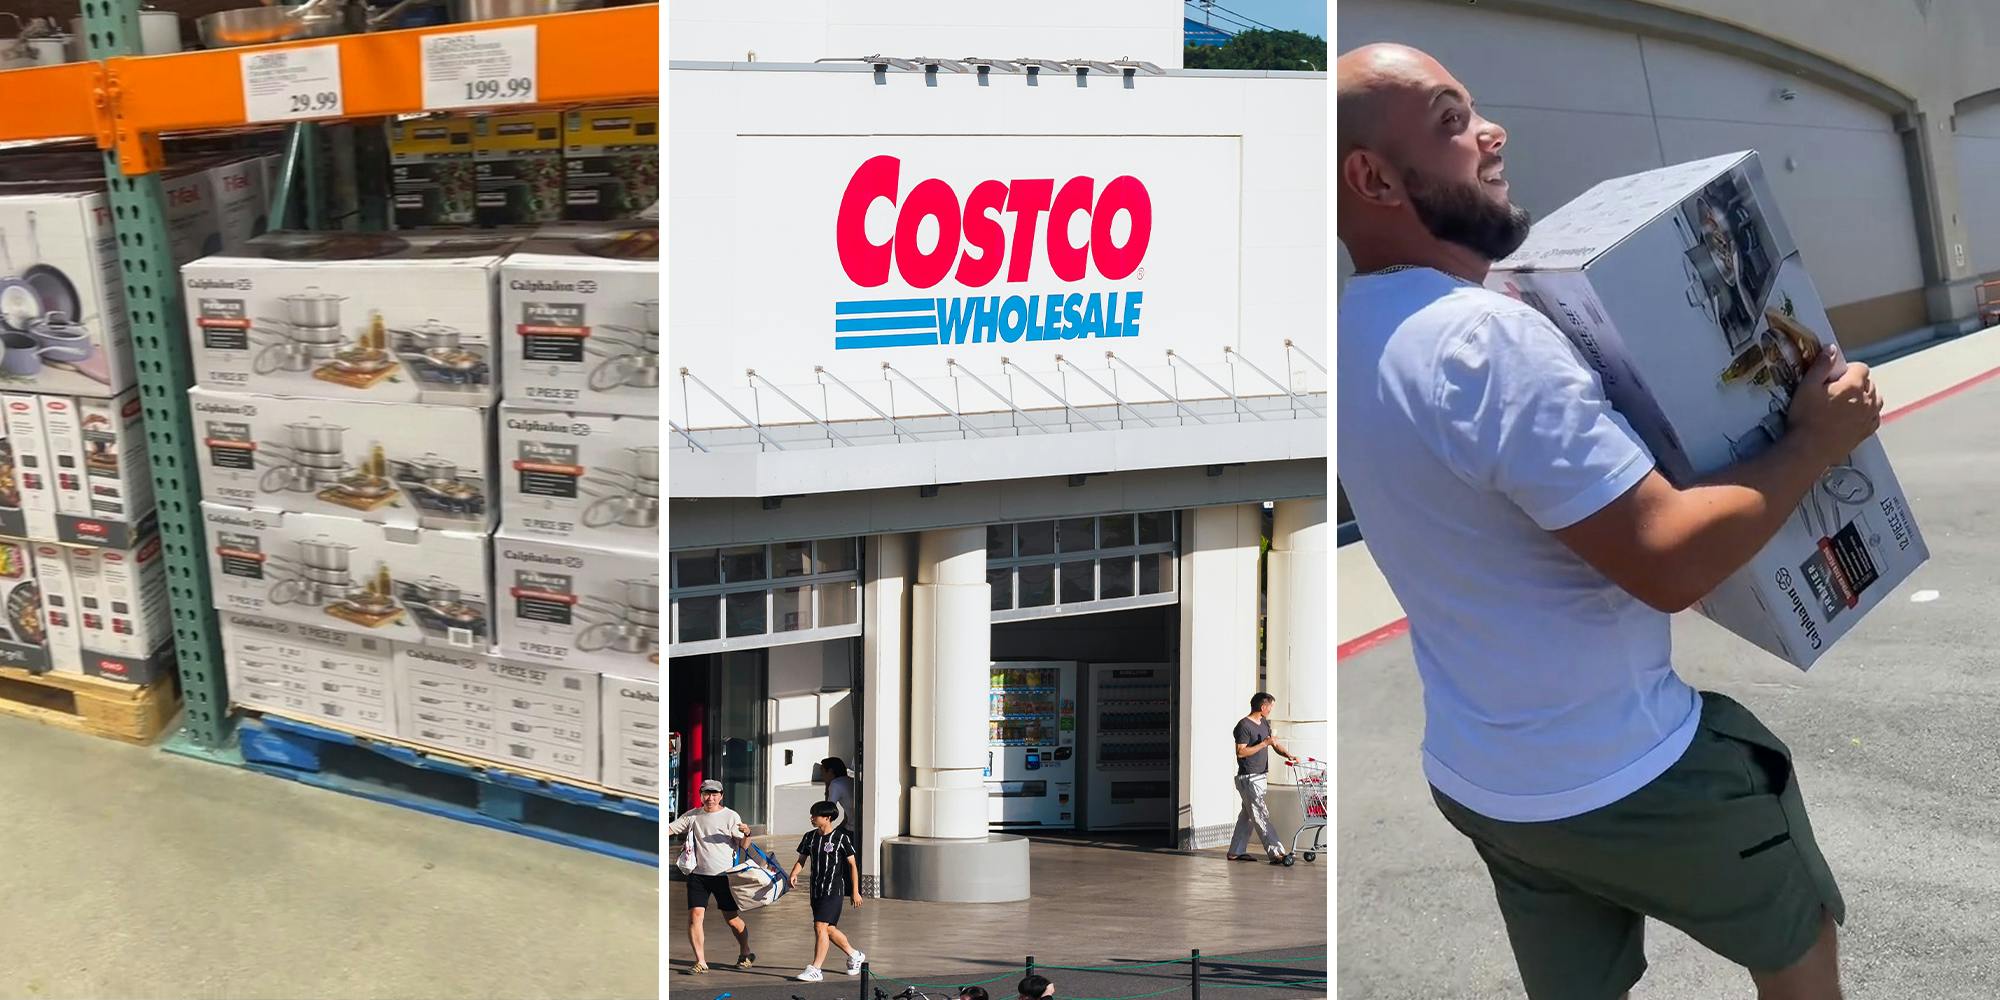 ‘We literally get new rugs every few months ’cause of this rule’: Costco customer returns cooking pans after 1 year because they got ‘scratched up’